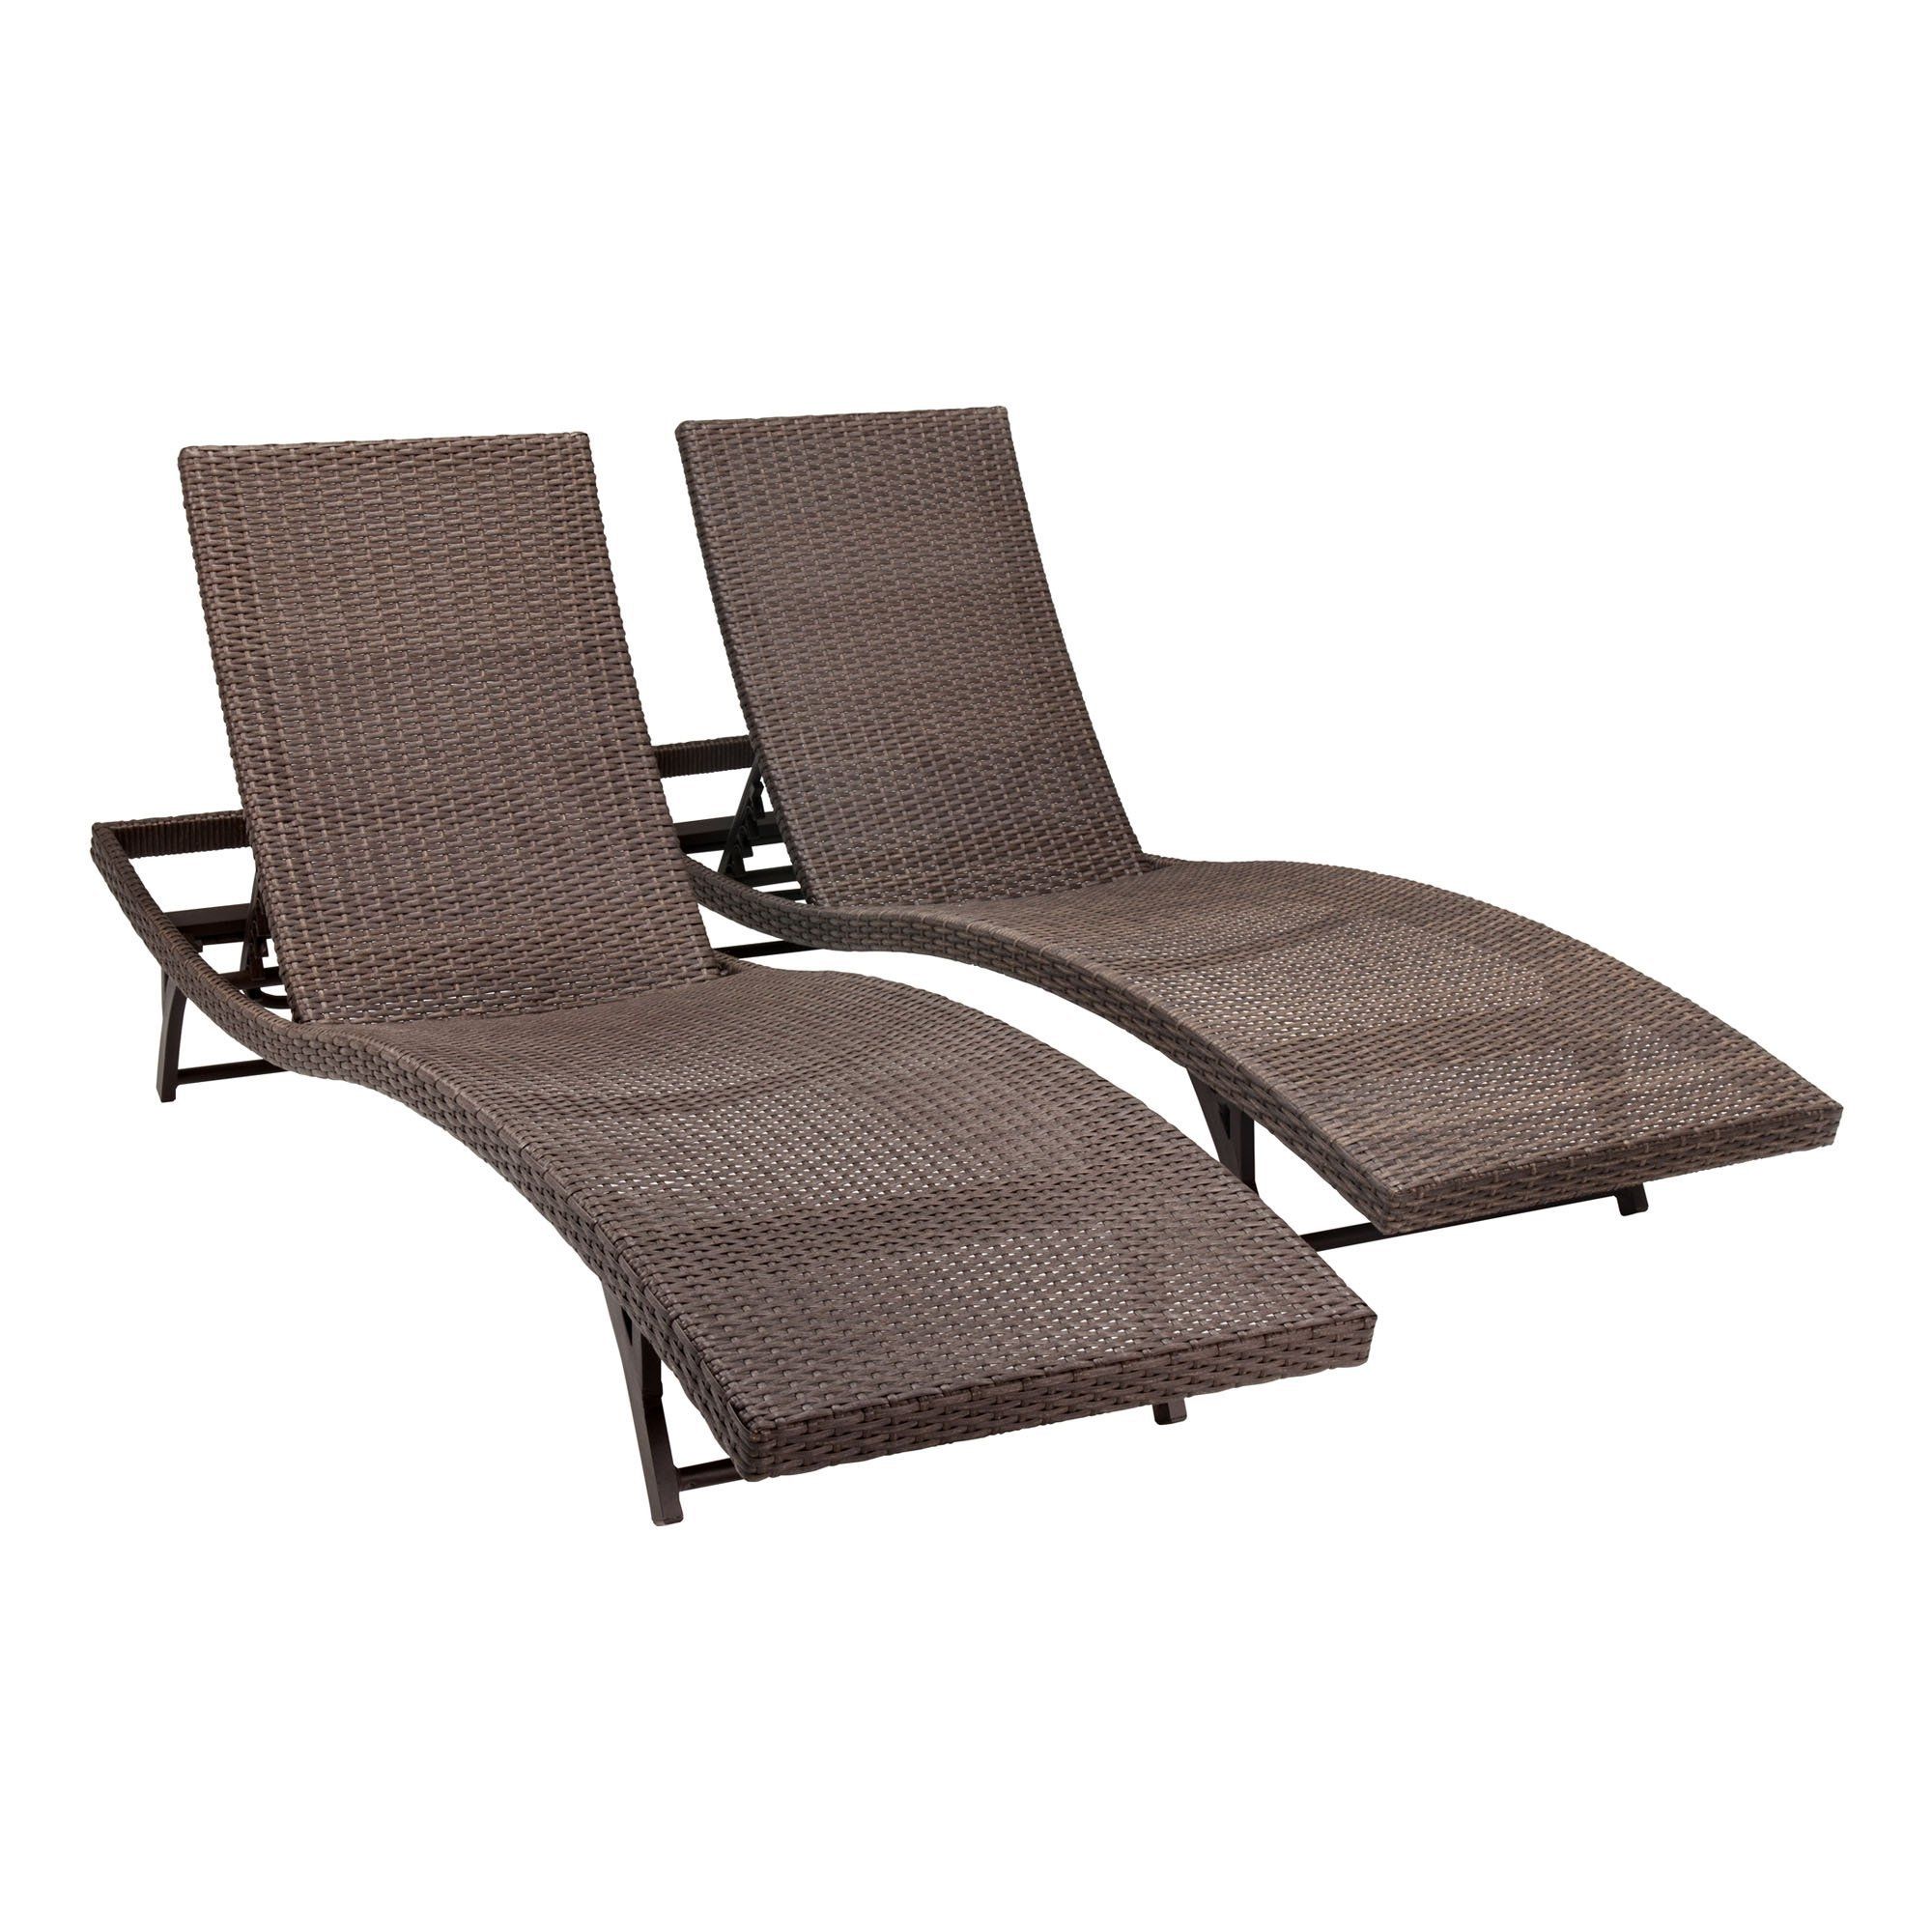 Most Recent Outdoor : Cheap Lounge Chairs Vinyl Strap Chaise Lounge Home Depot Pertaining To Vinyl Strap Chaise Lounge Chairs (Photo 14 of 15)